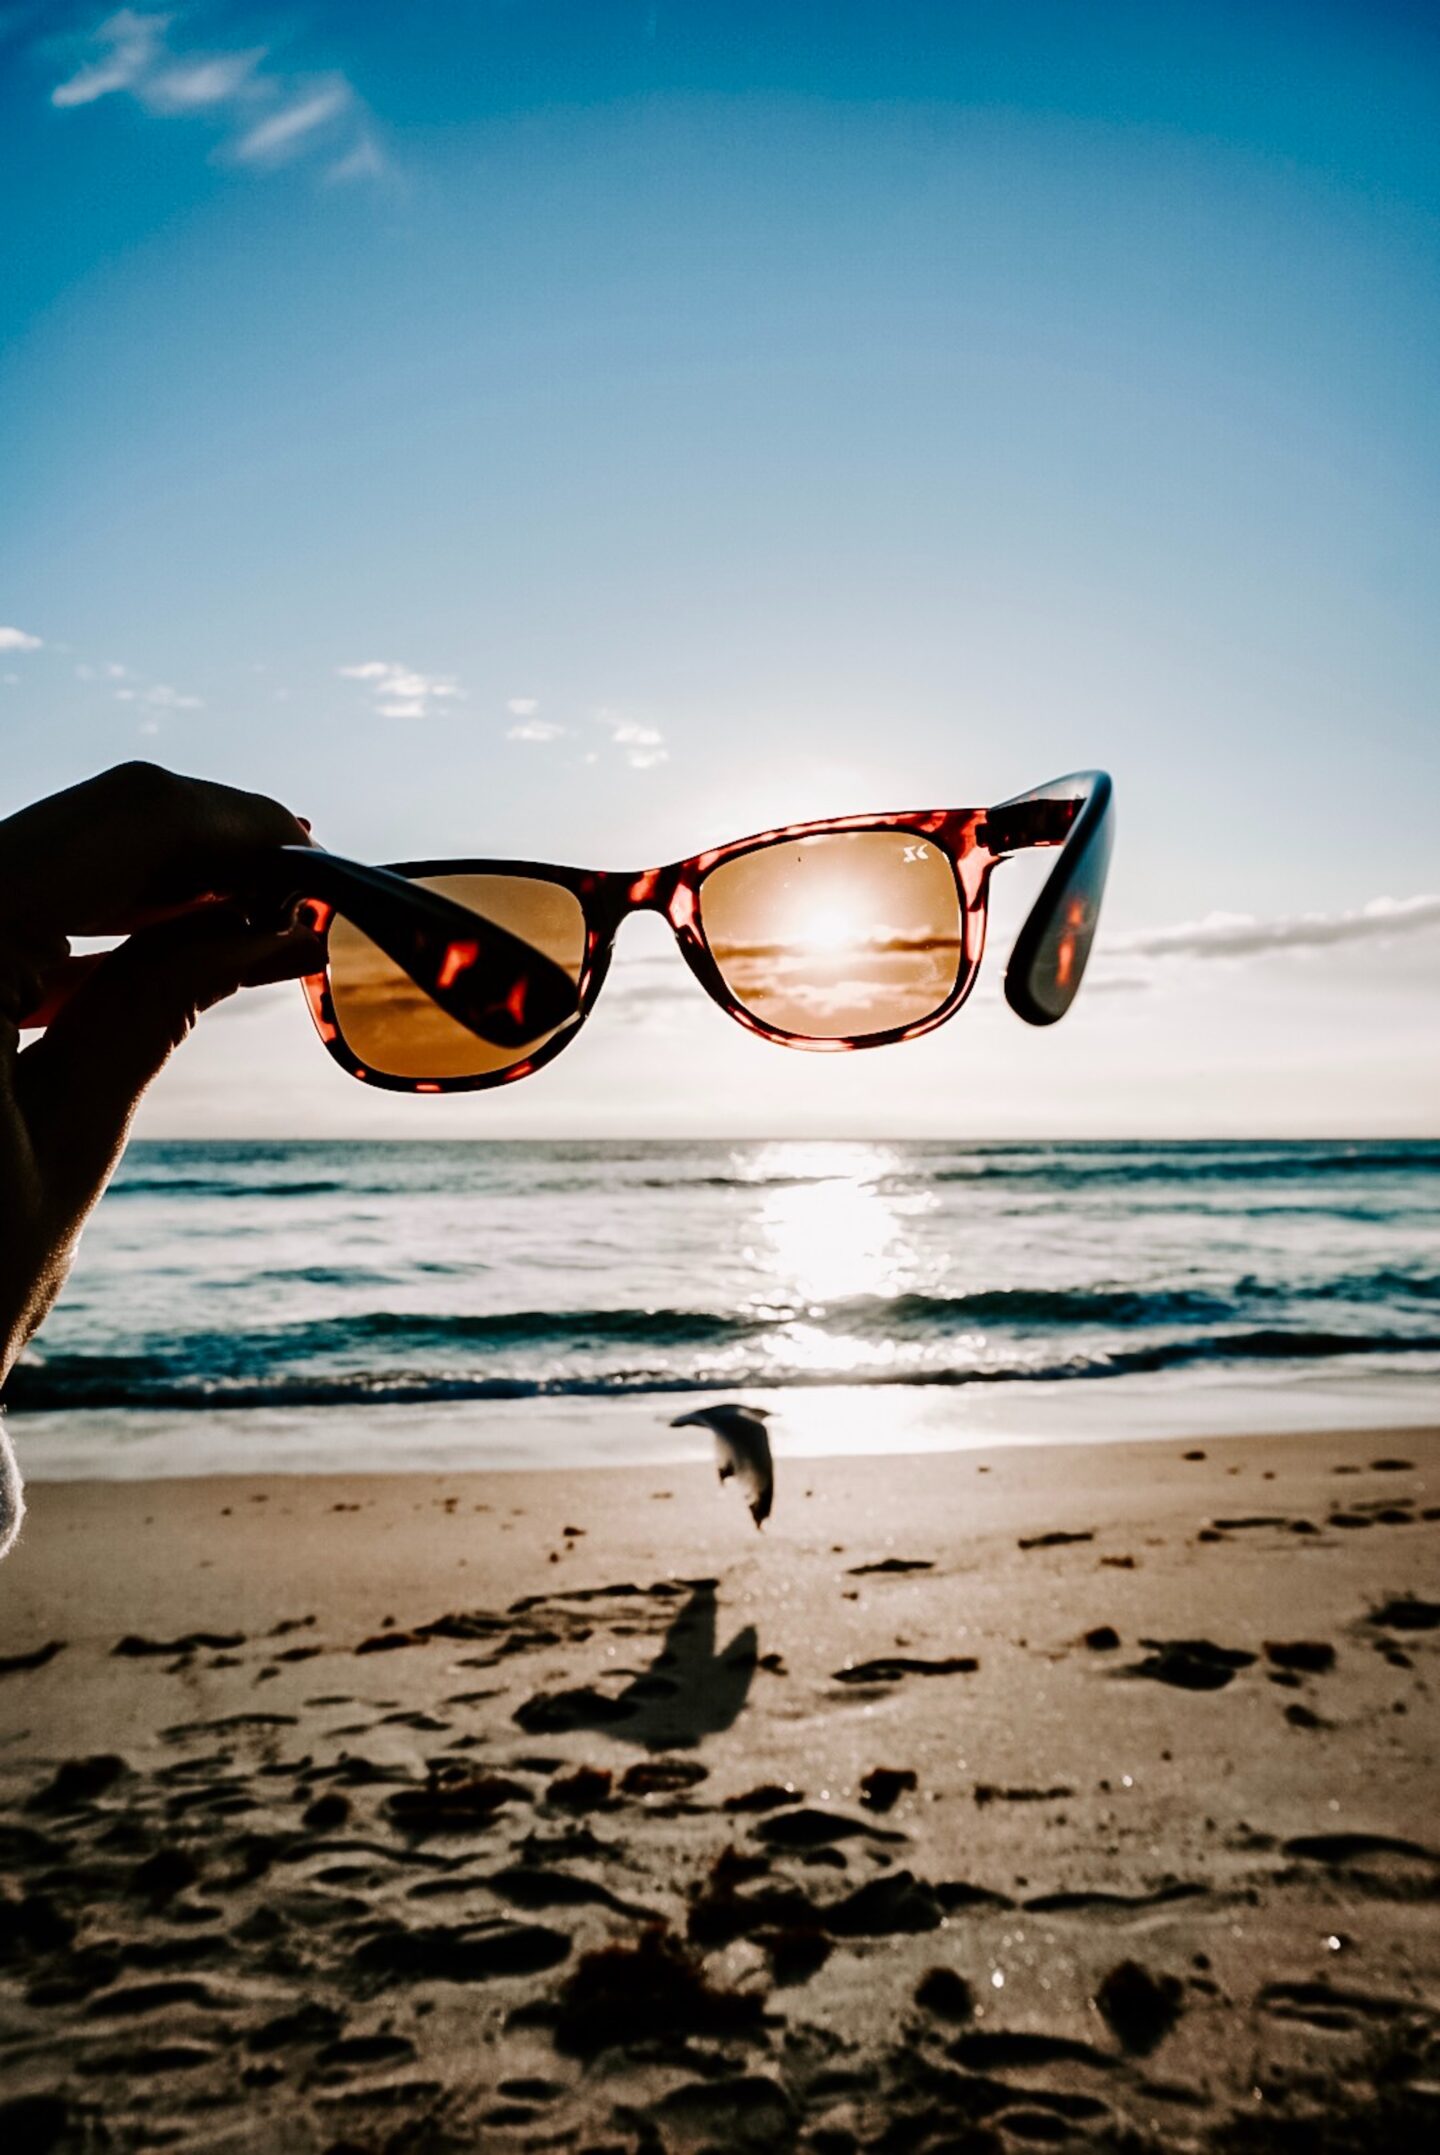 How to choose eye protection for travel